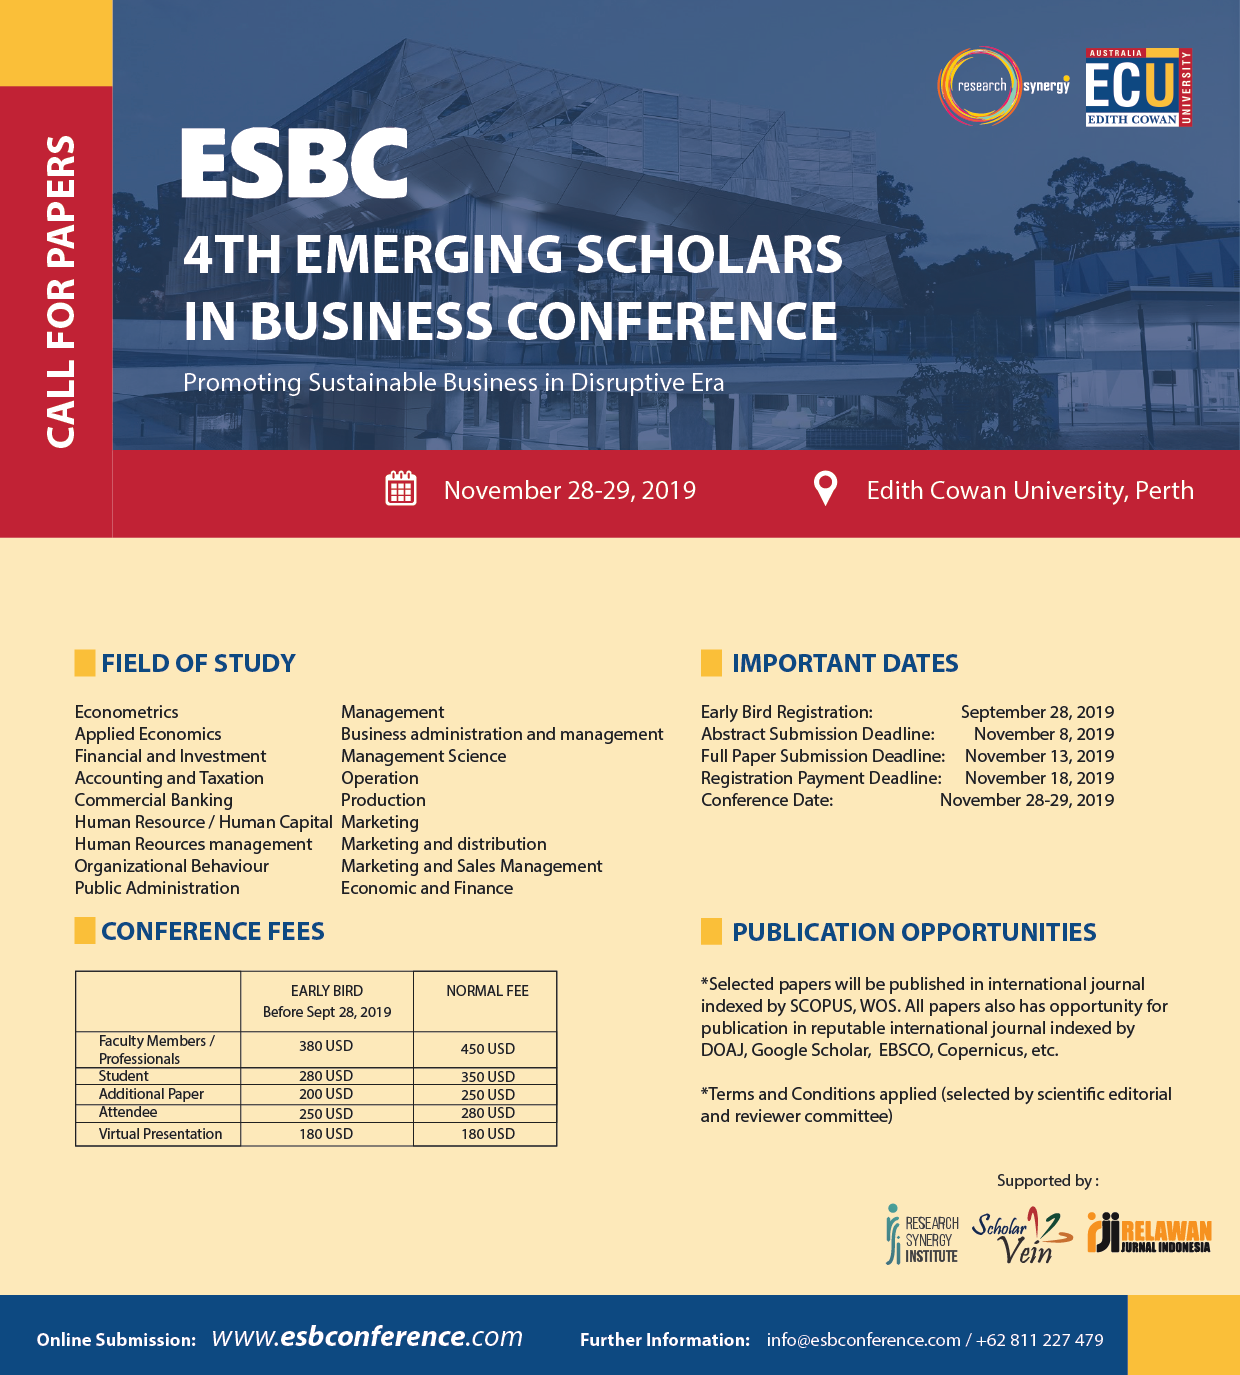 4th Emerging Scholars in Business Conference (ESBC)